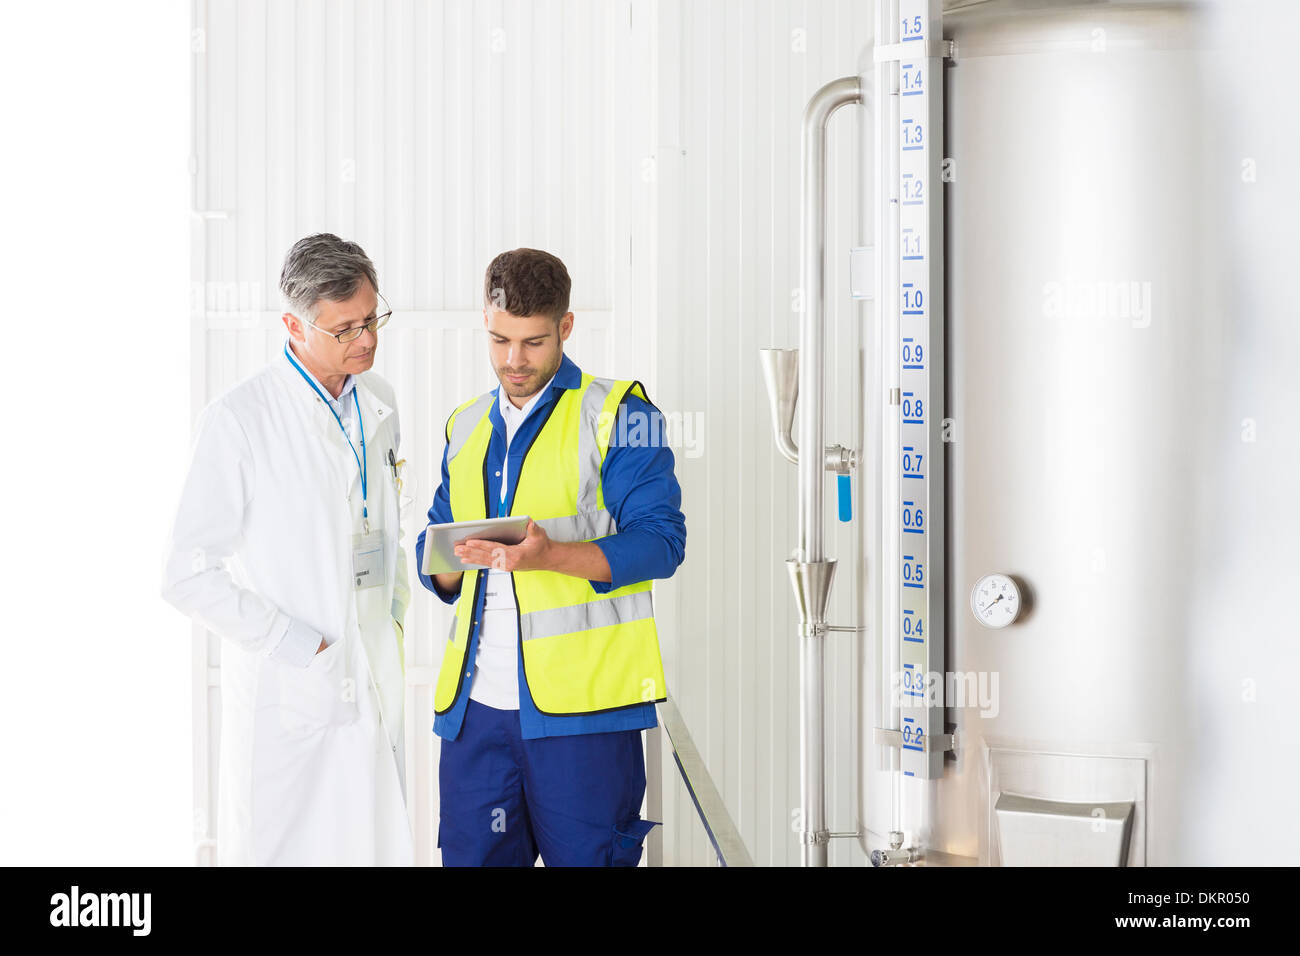 Worker and scientist talking in food processing plant Stock Photo